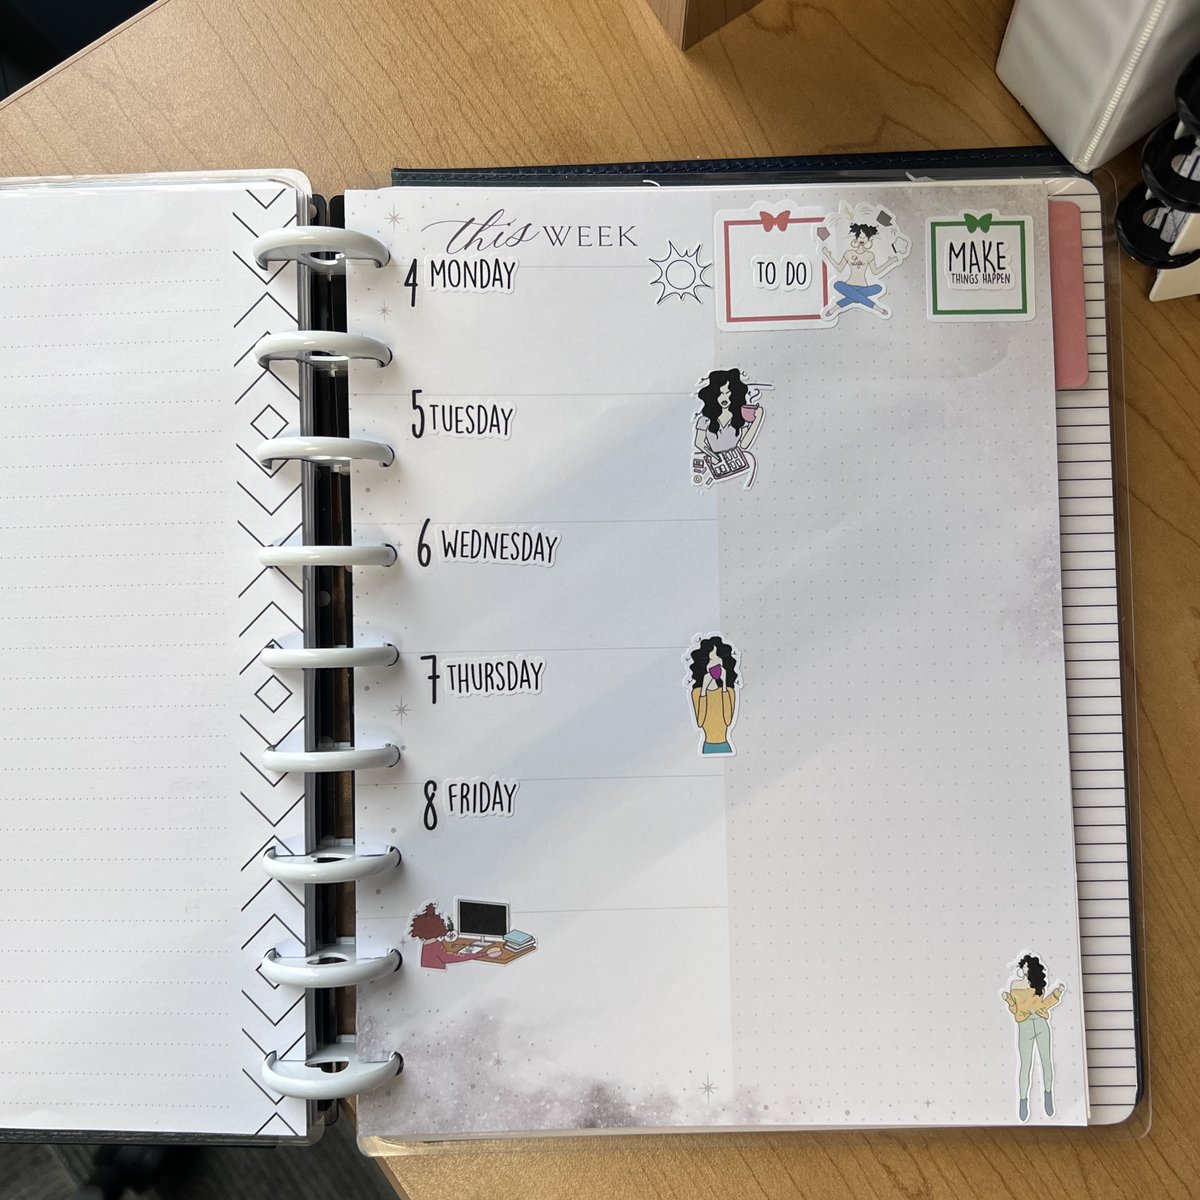 Organized chaos: Mapping out the week ahead, one day at a time. 🗓️✨ #weeklyplanning #workspread (10/52).

#satindoll #satindollco #satindollpr #weeklykit #plannercommunity #planneraddict #plannernerd #plannerbabe #plannerideas #plannerlove #ilovetoplan #planahappylife